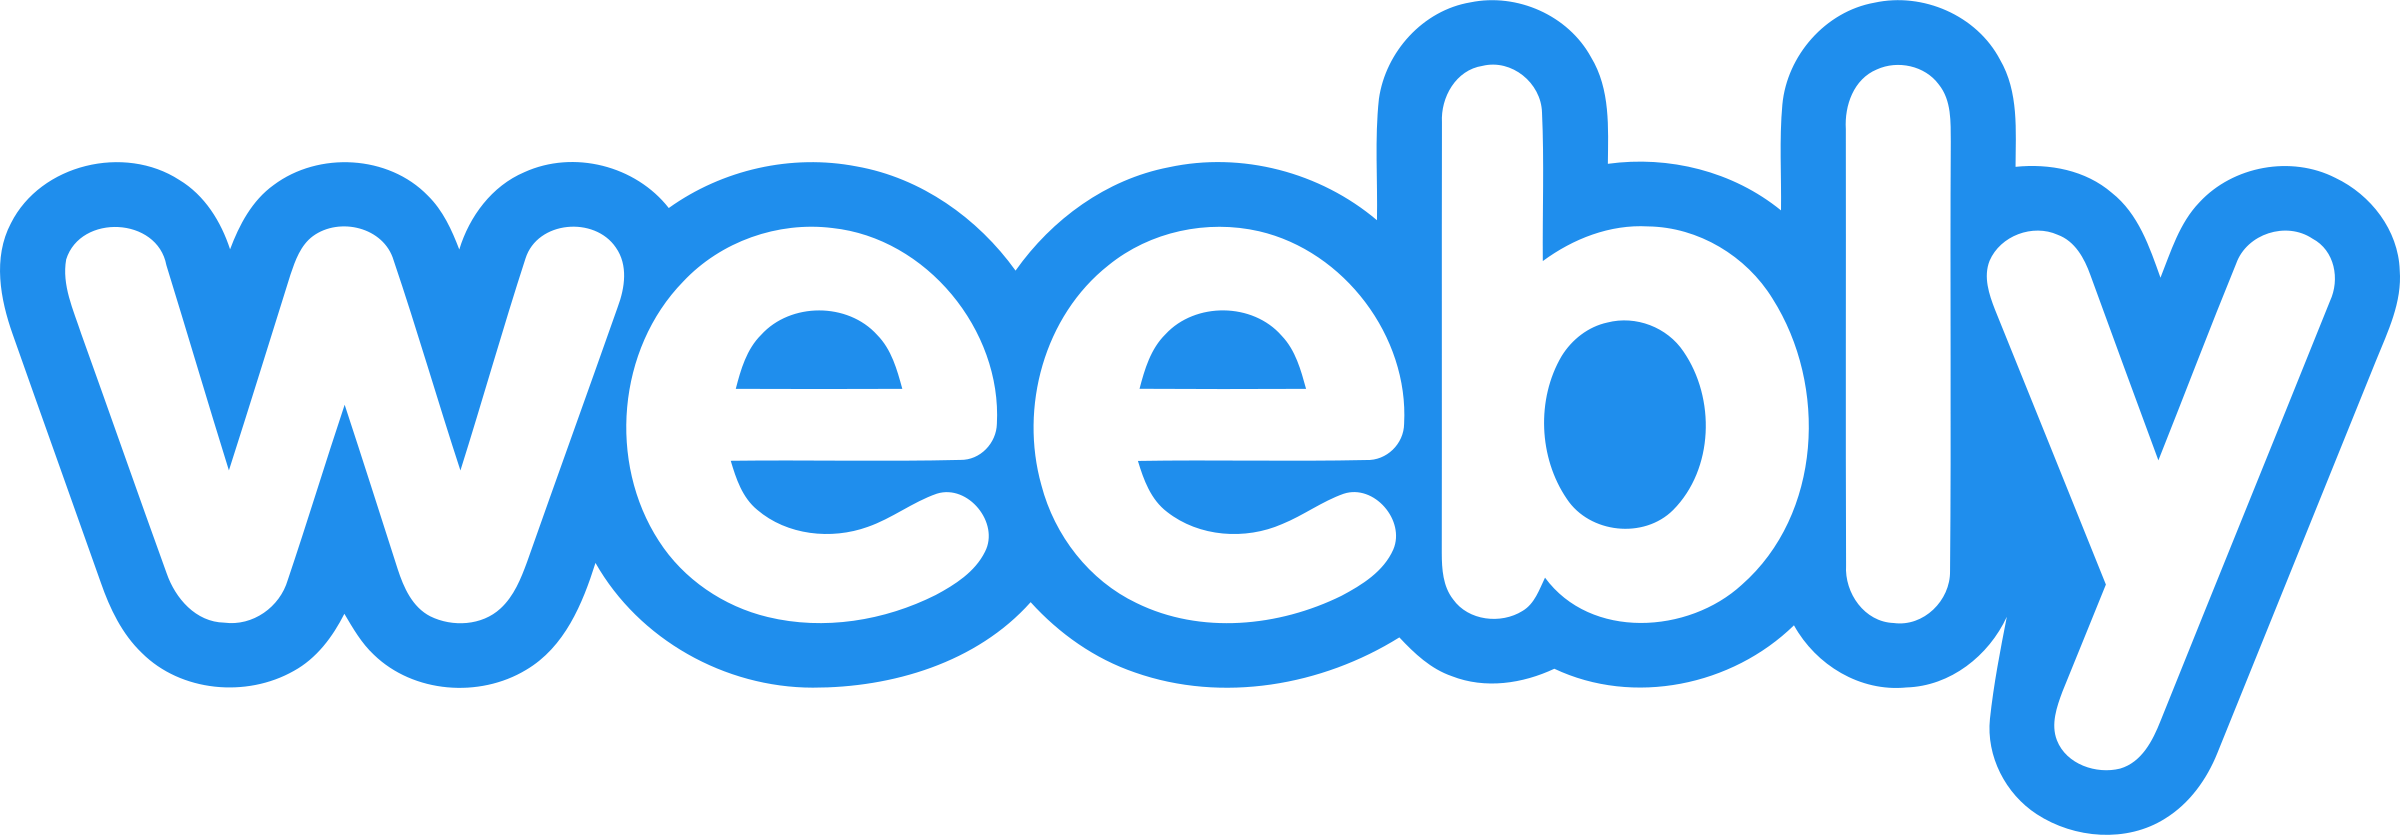 Weebly logo - Copyright Weebly